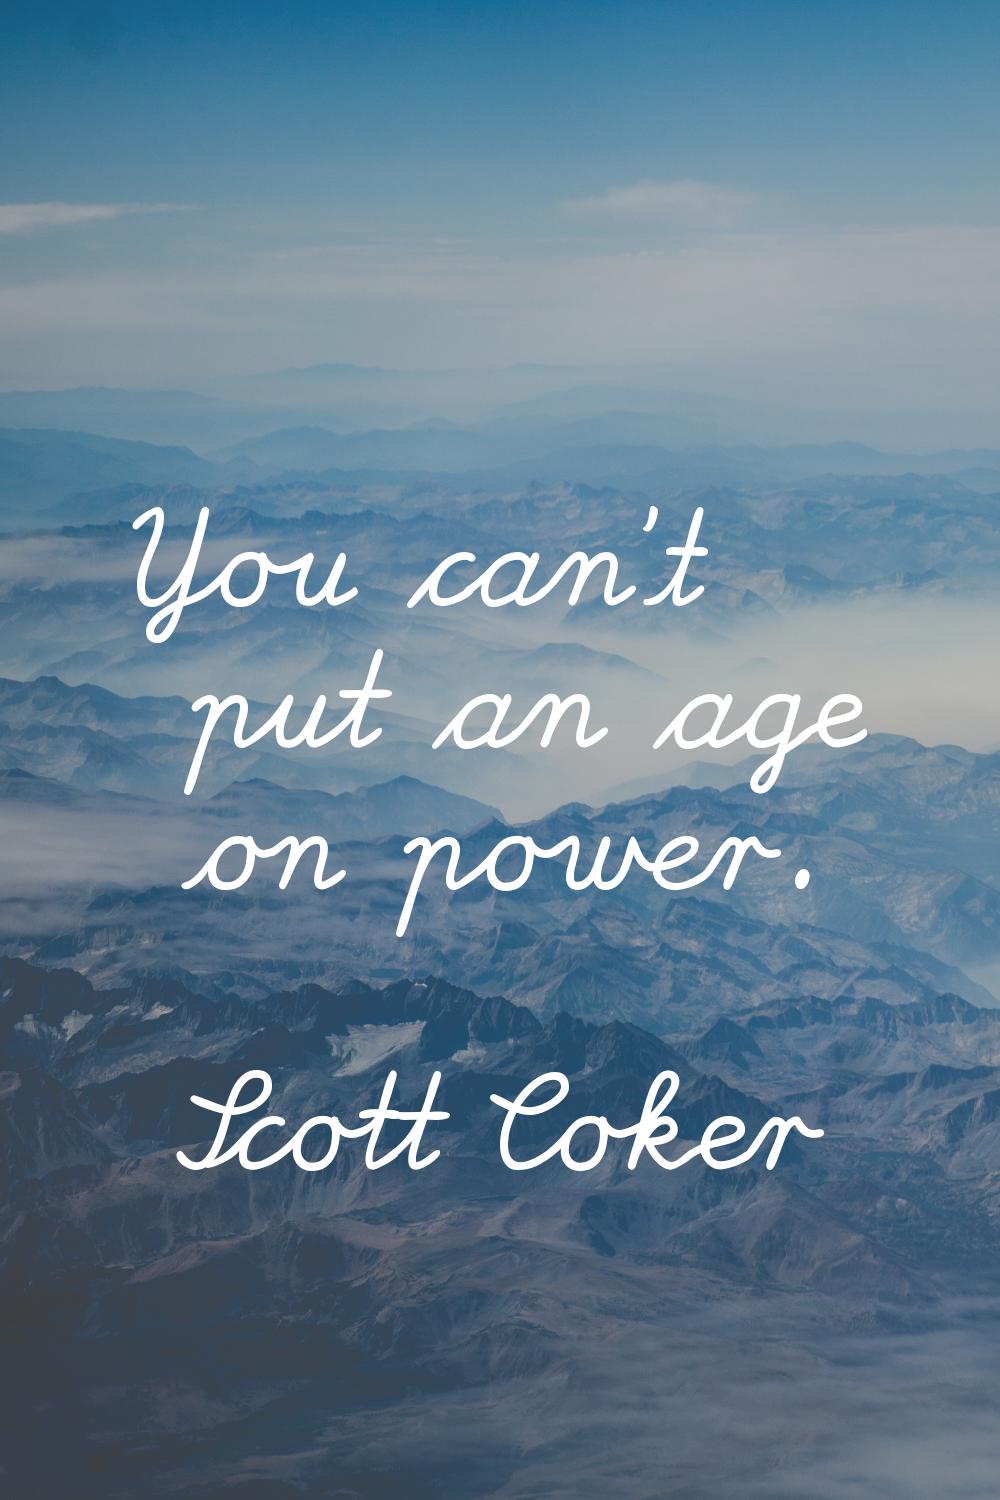 You can't put an age on power.